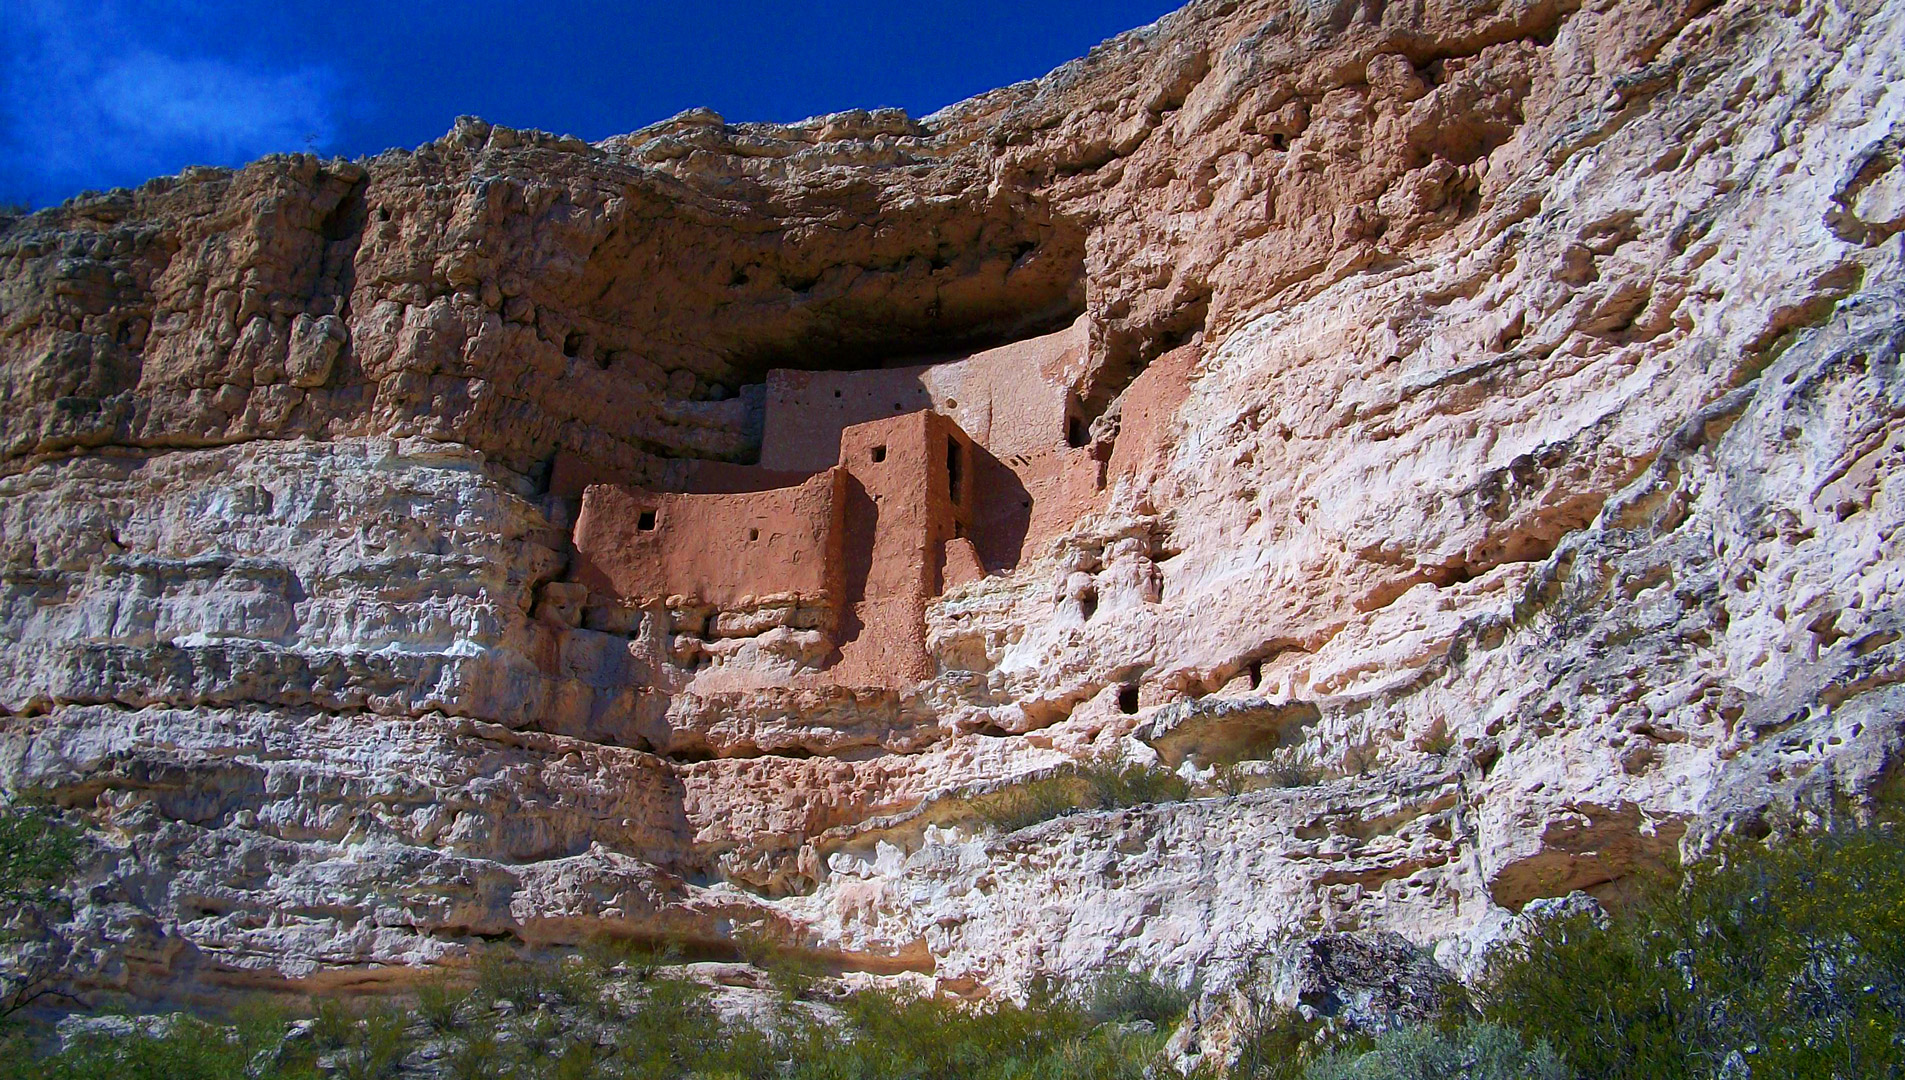 The well-preserved ruins on the limestone cliffs at Montezuma Castle National Monument.